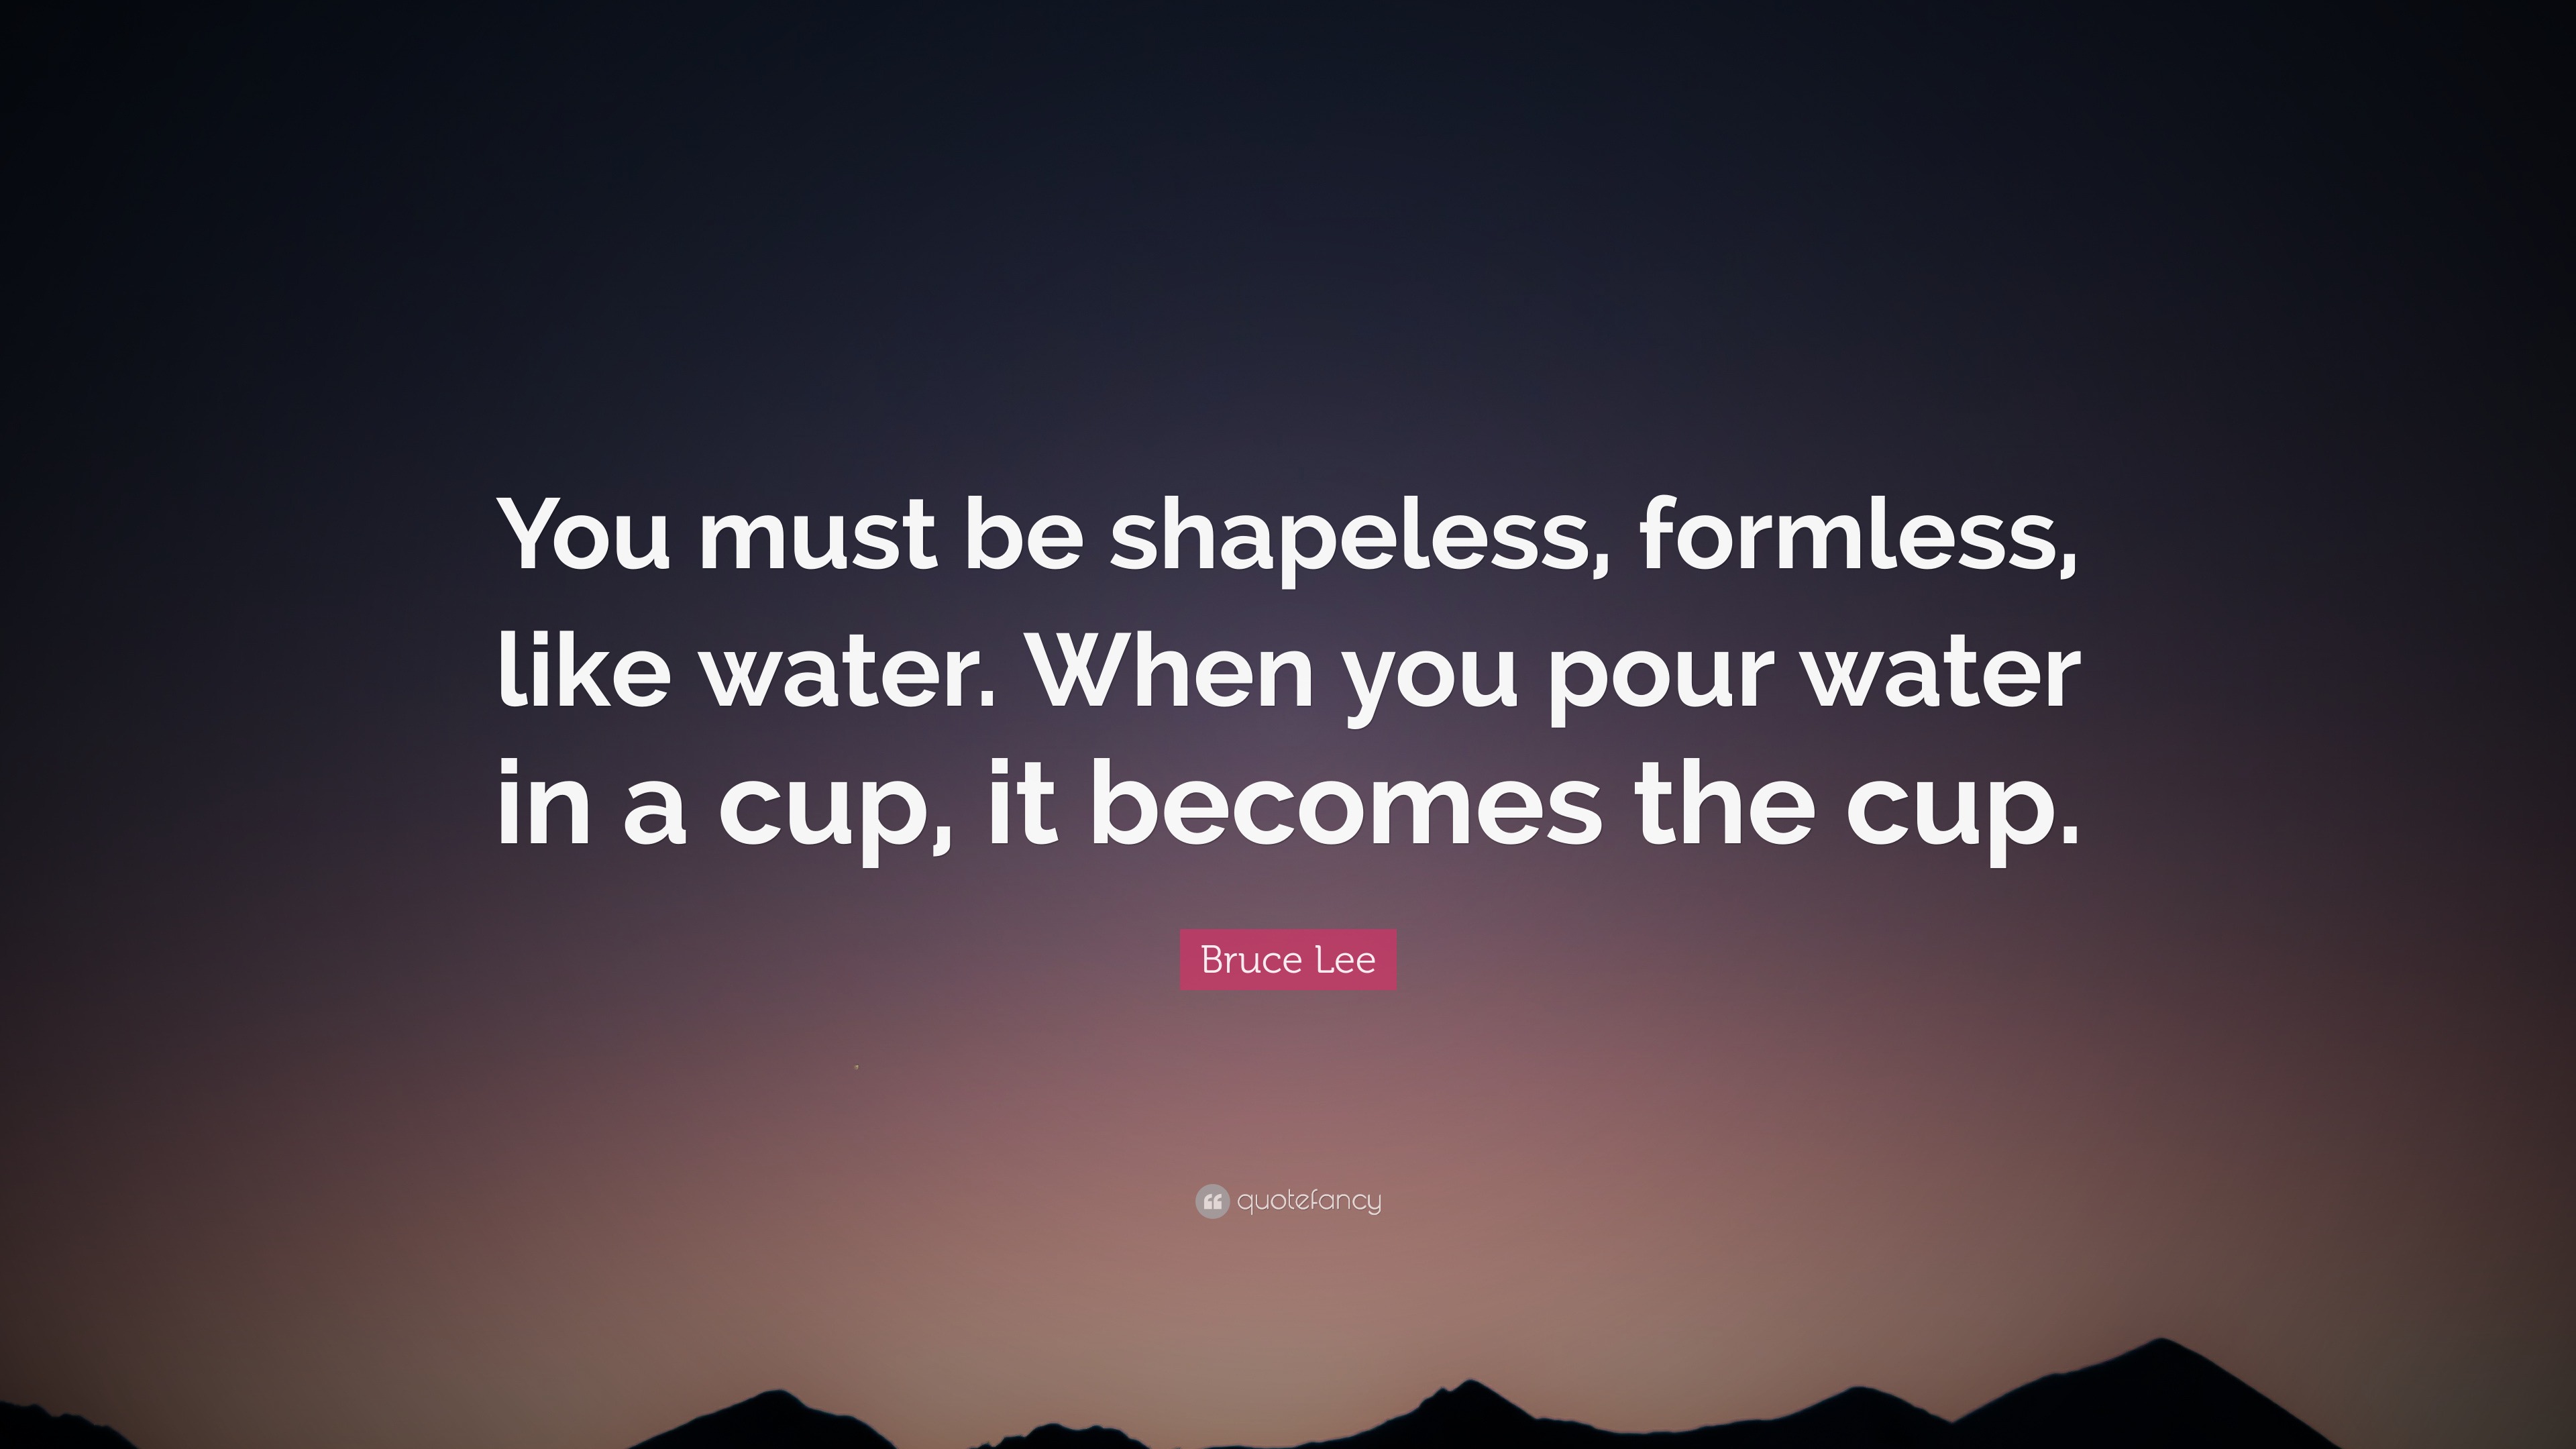 Bruce Lee Quote: “You must be shapeless, formless, like water. When you  pour water in a